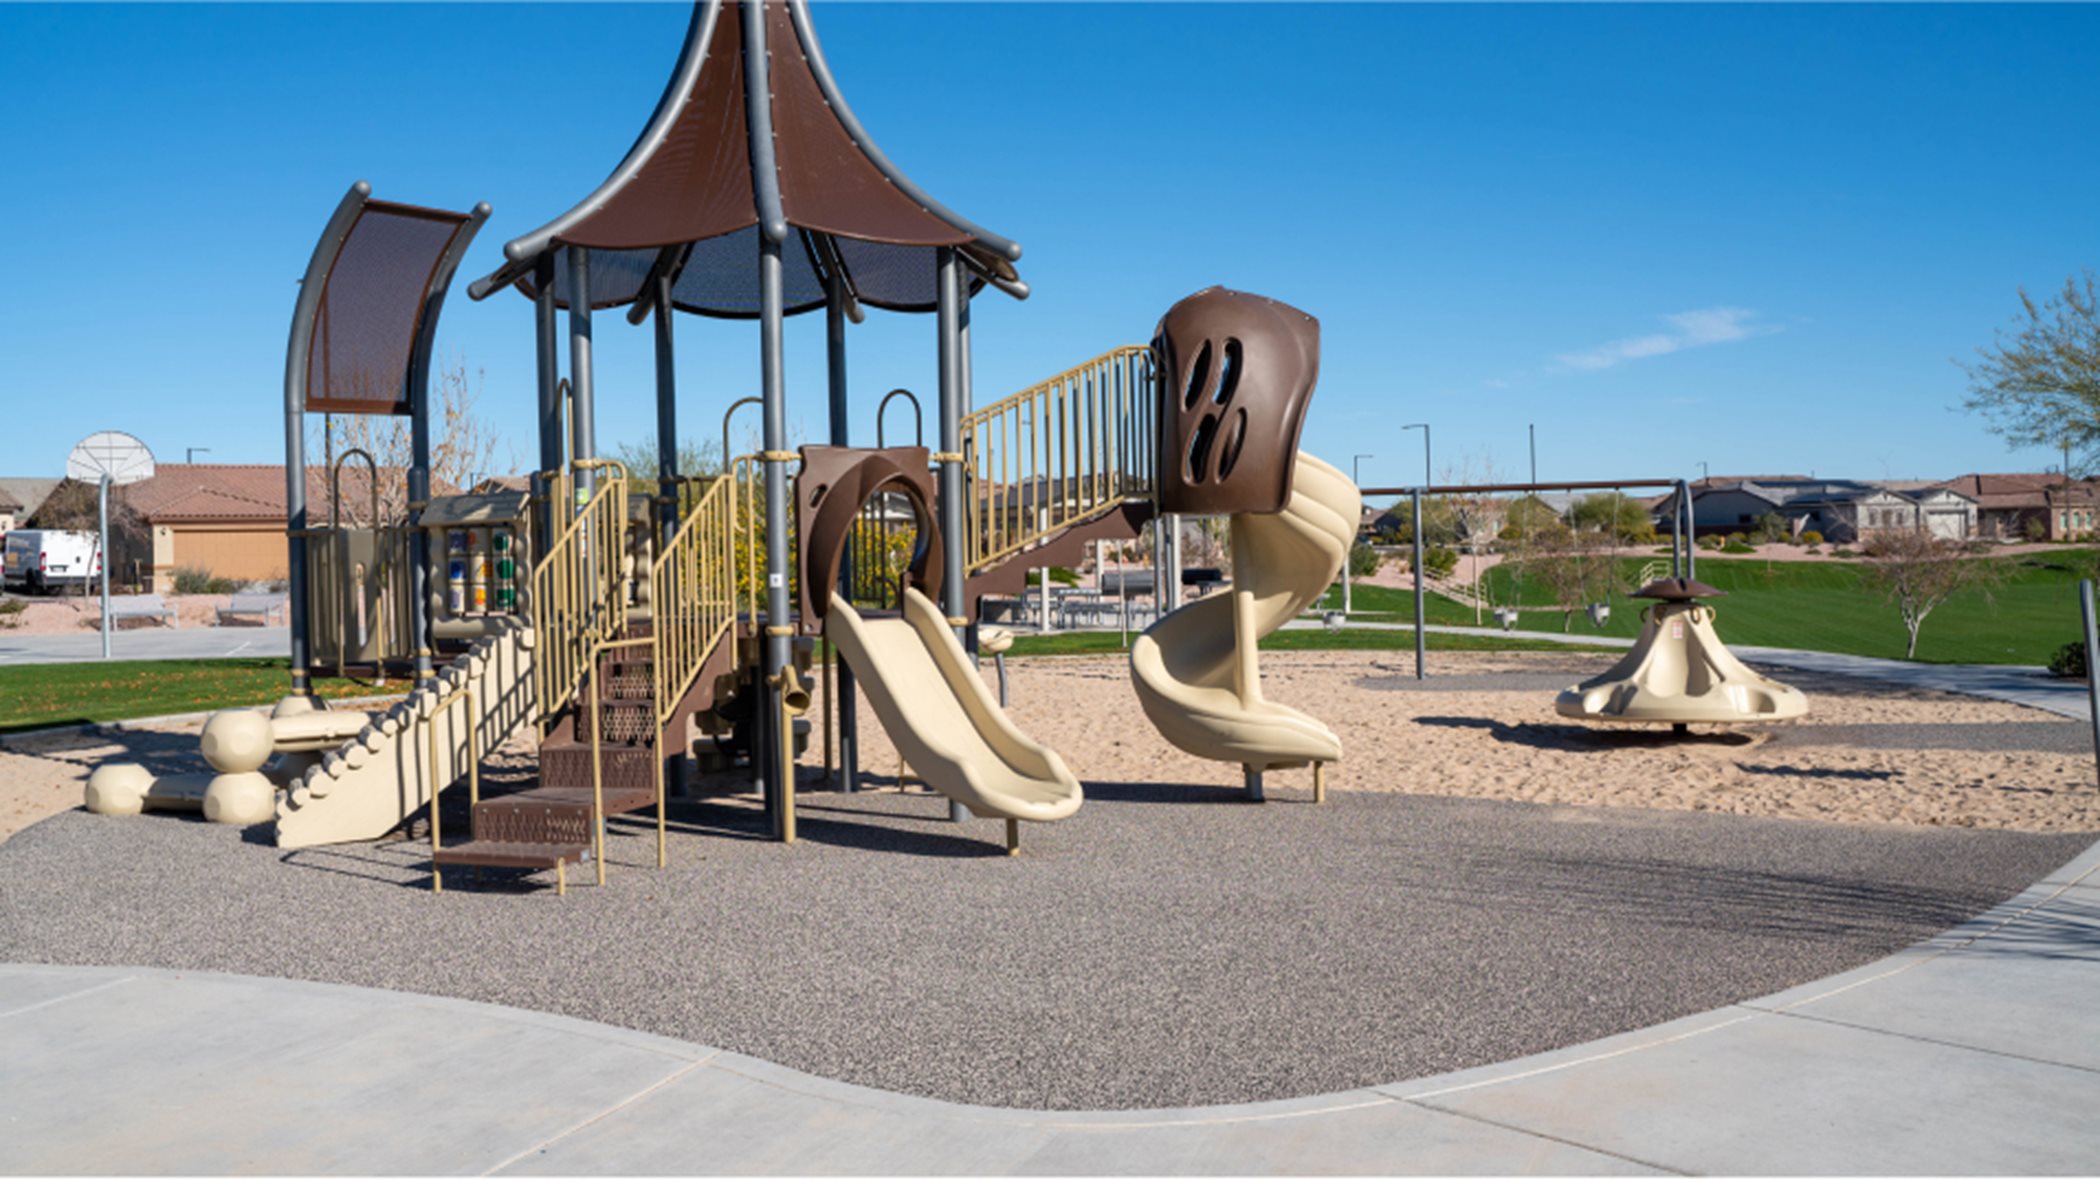 Playground image with slides in focus